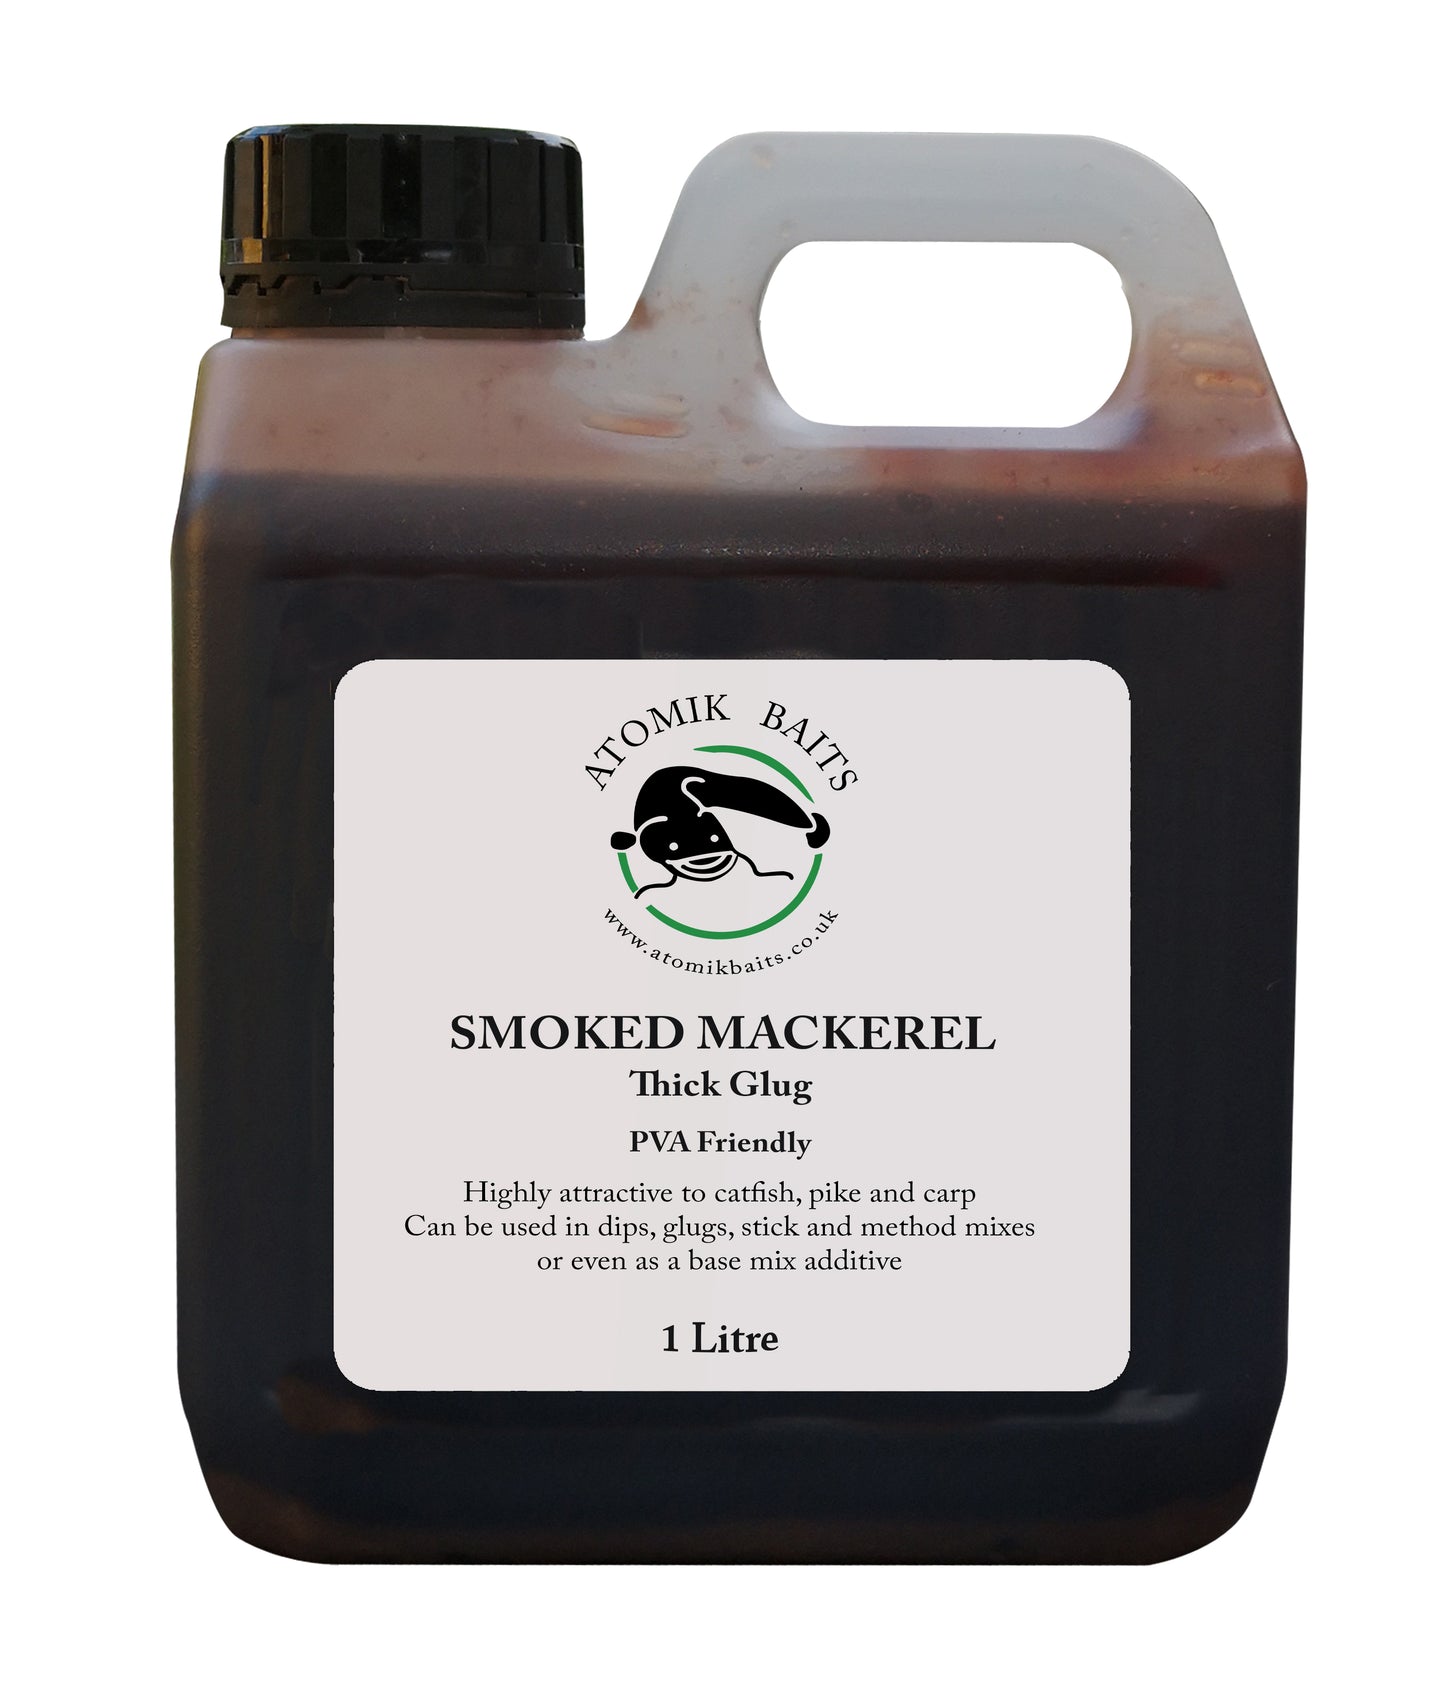 Smoked Mackerel Flavour – Glug, Particle Feed, Liquid Additive, Dip 1 Litre